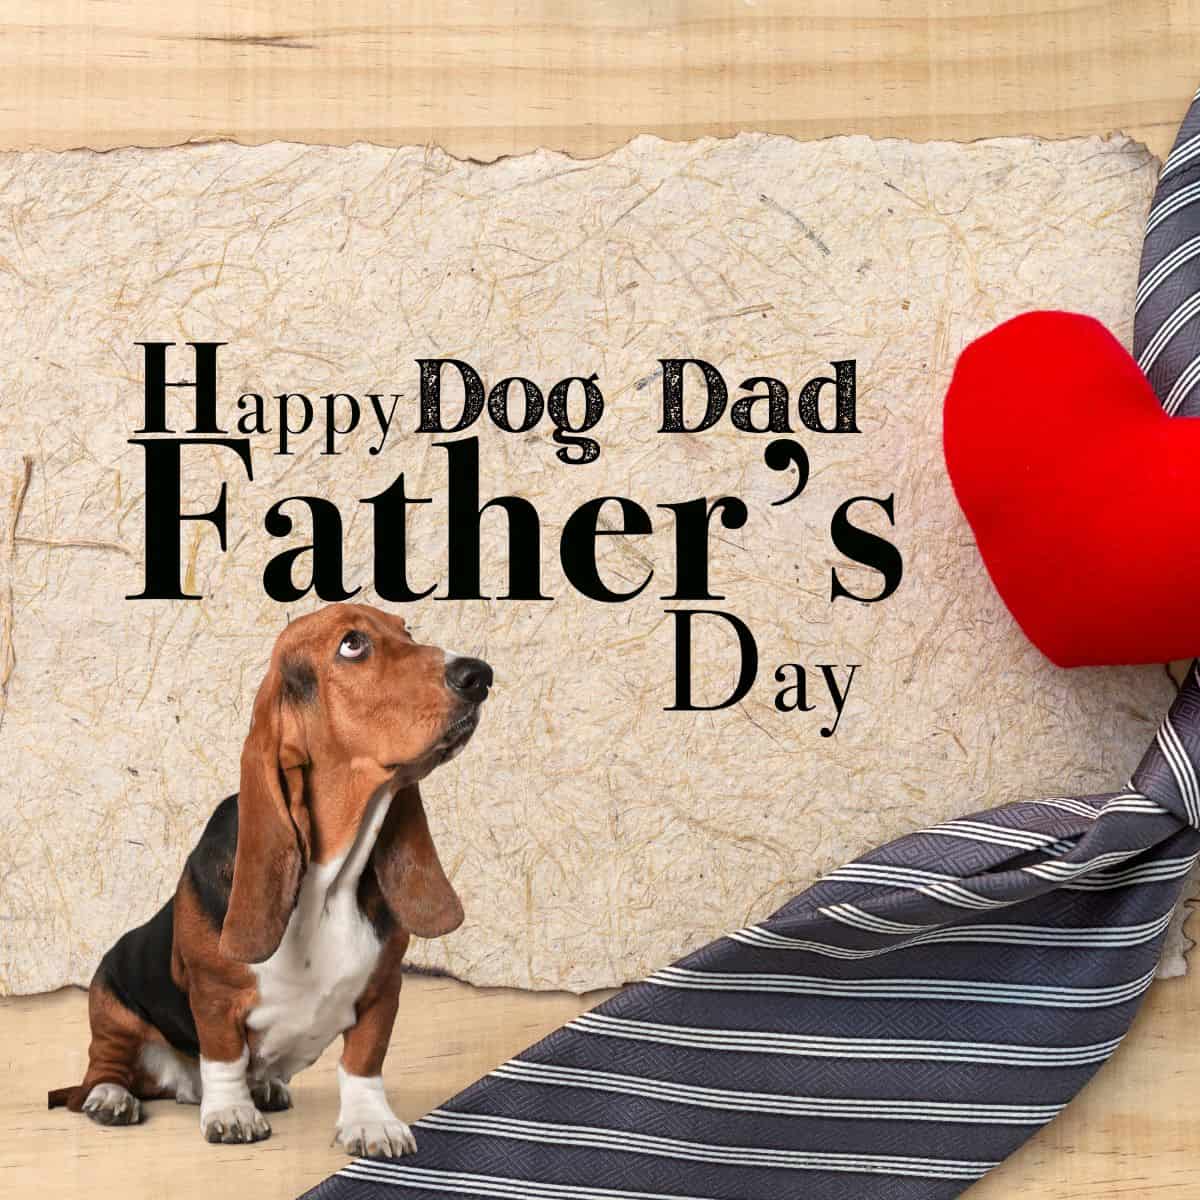 Father's Day for dog dads